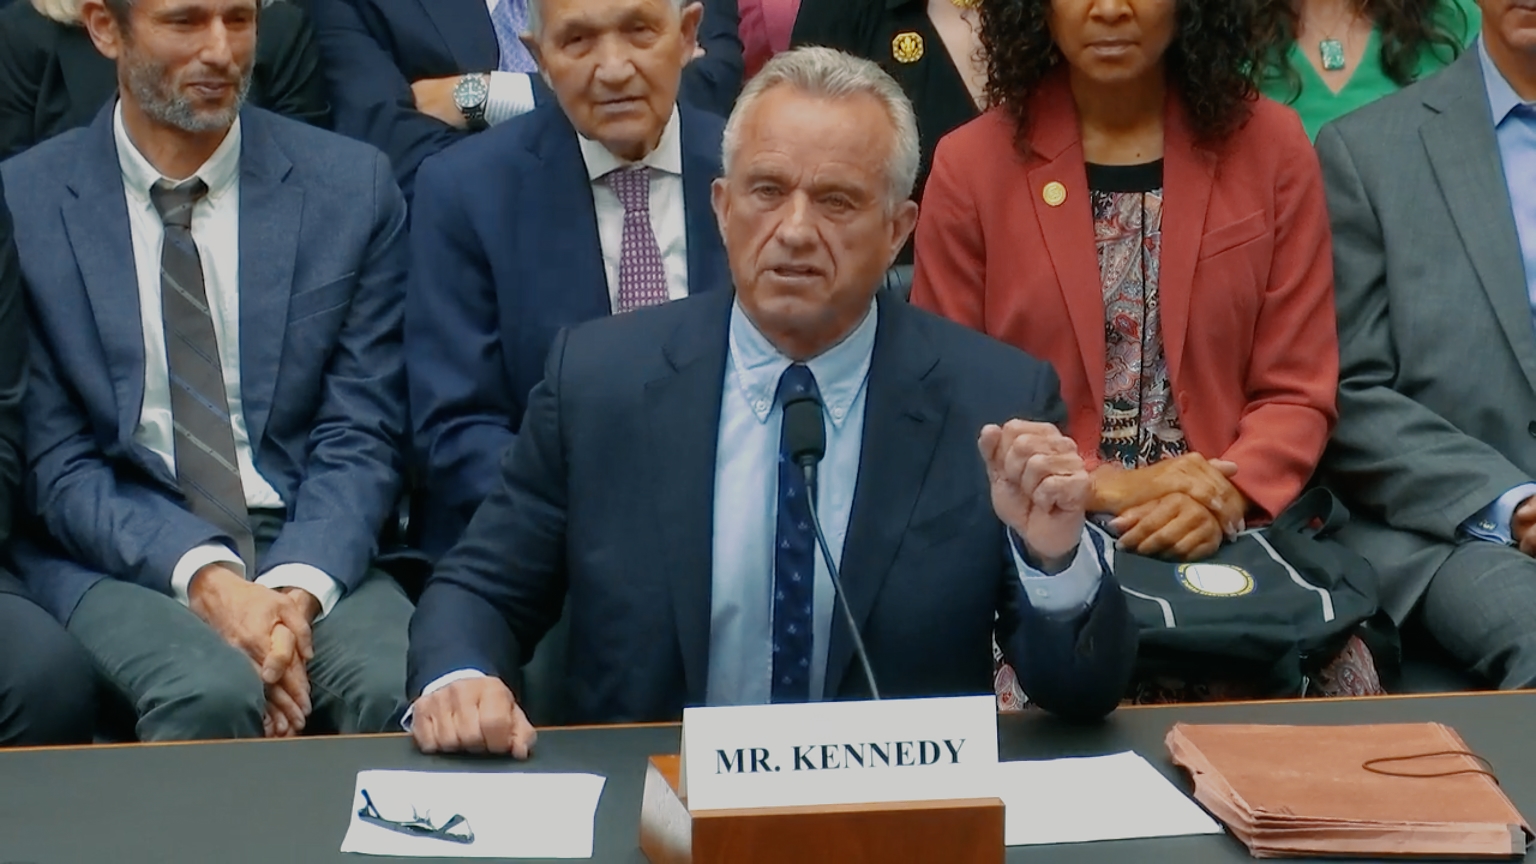 Watch: Democrats Vote To Censor Robert F. Kennedy Jr. At Hearing Where He Was Invited To Speak On Censorship